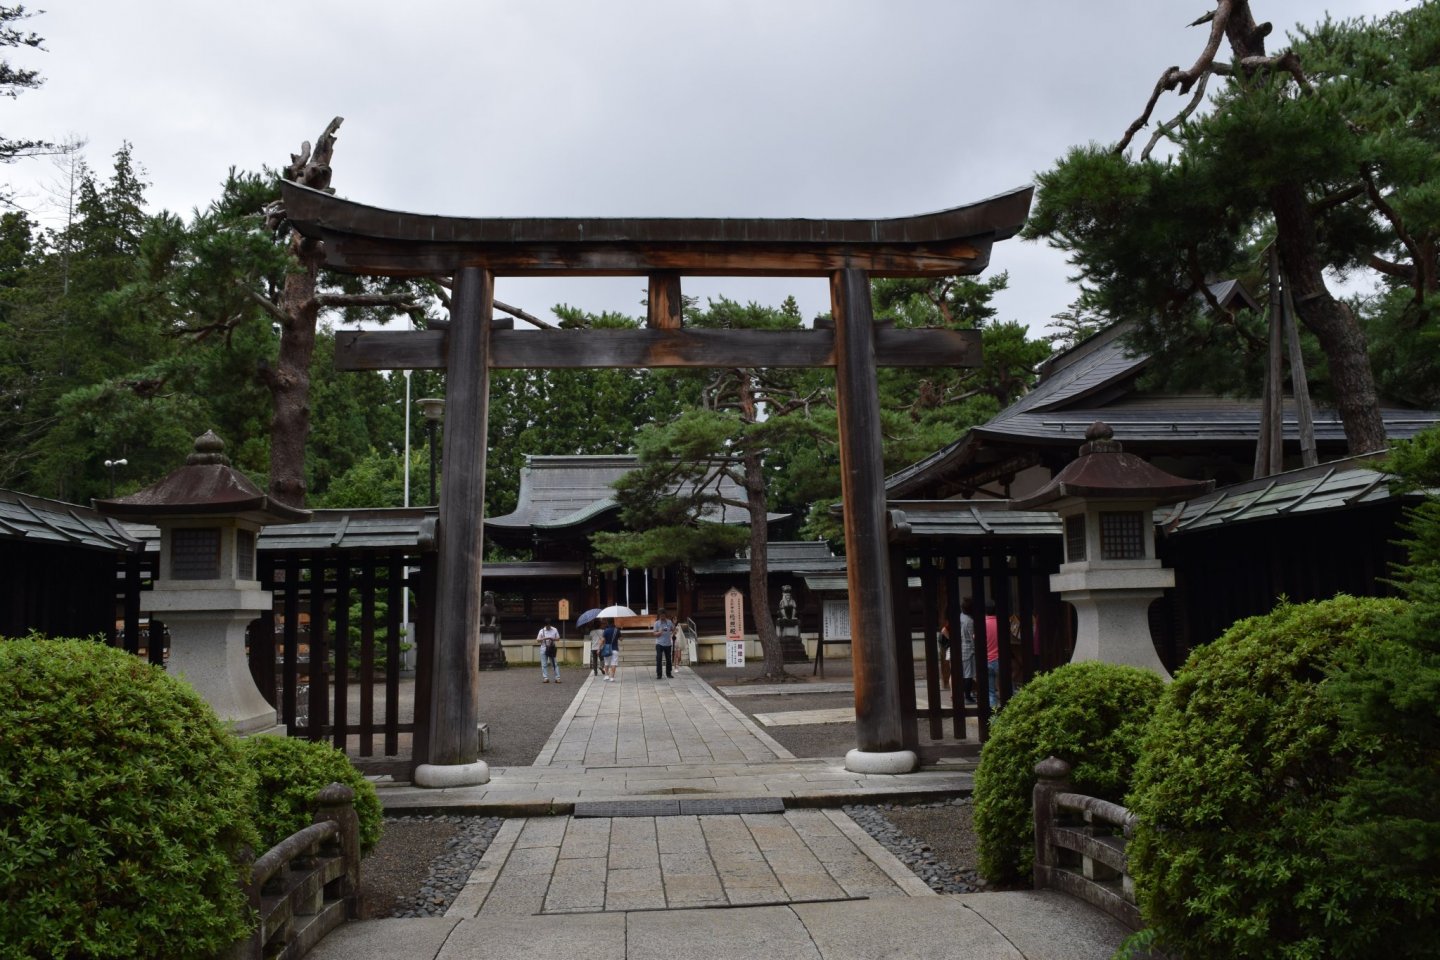 The torii arch by the entrance